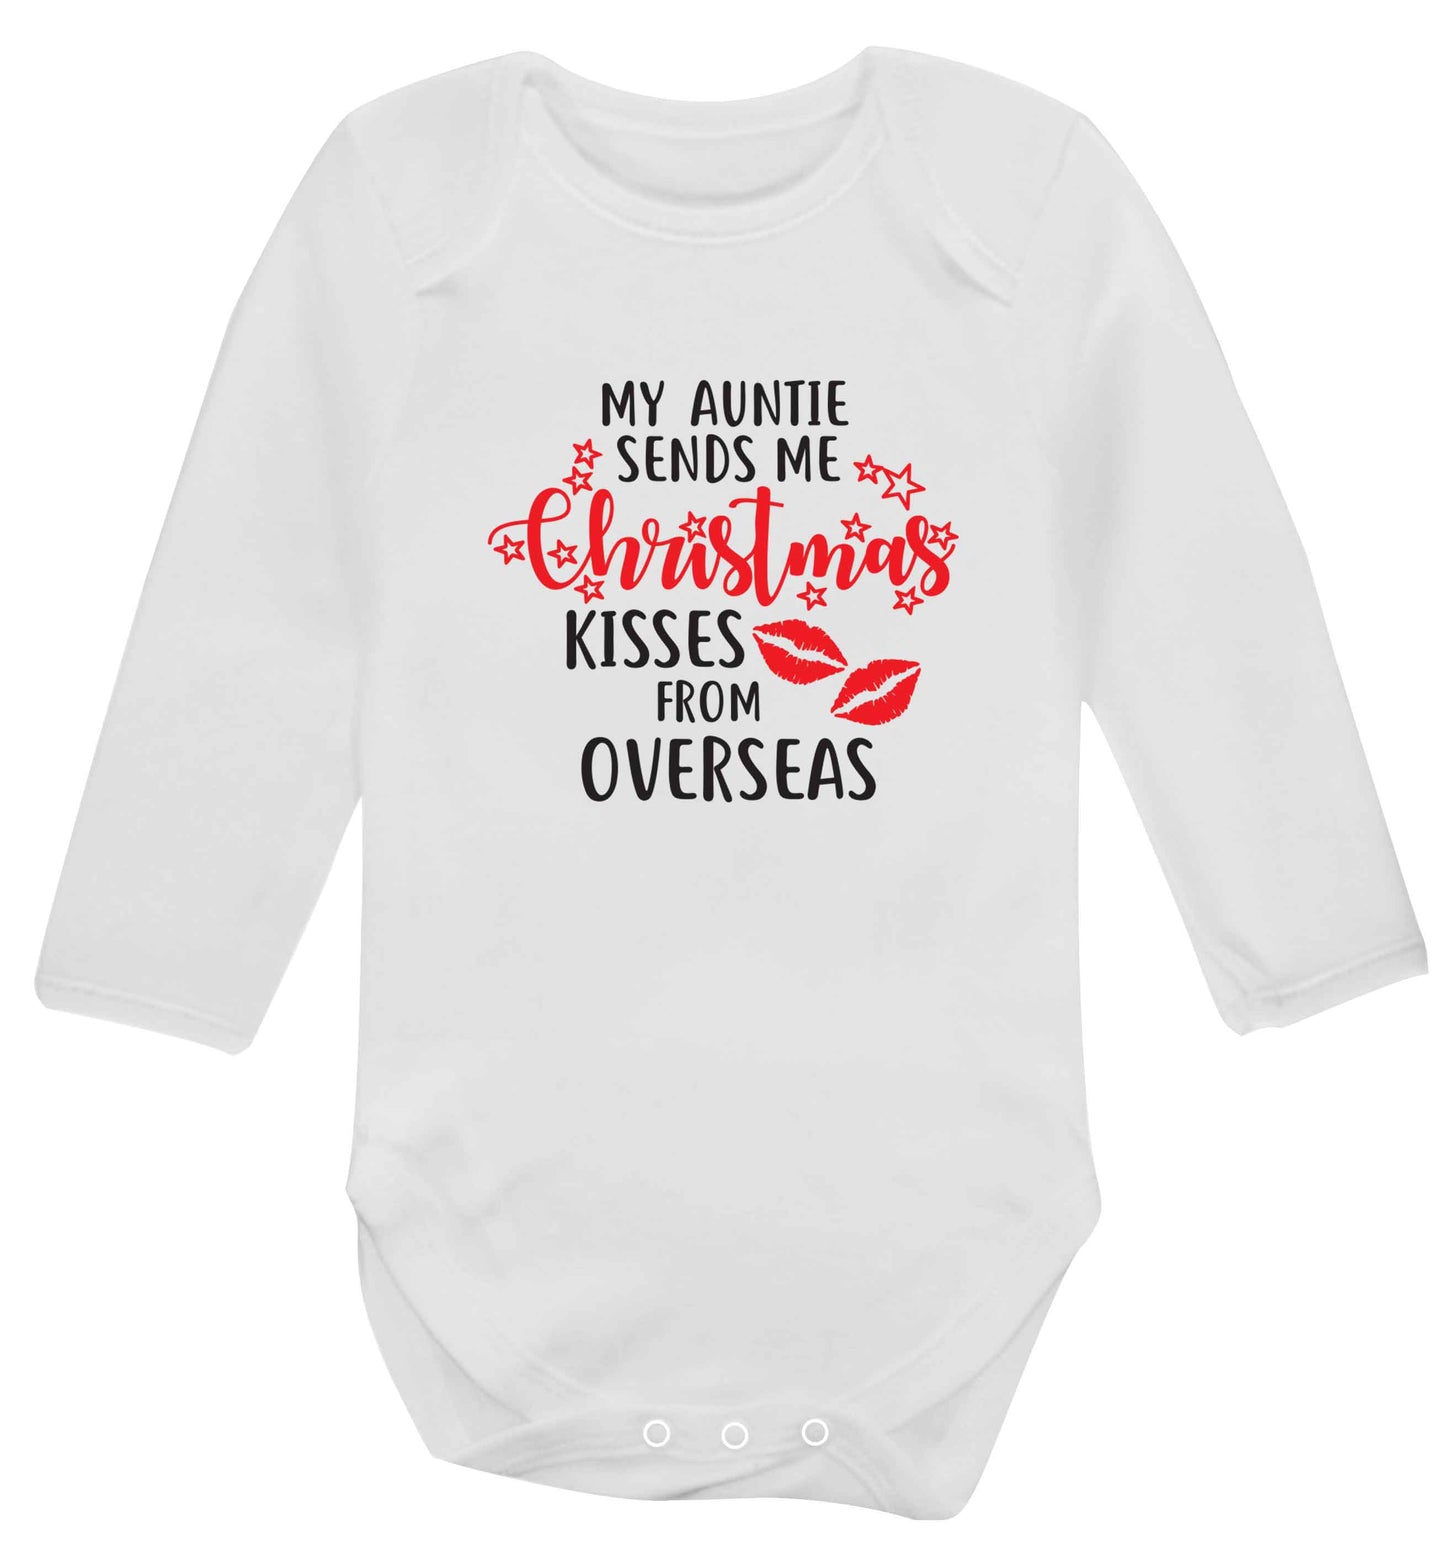 Auntie Christmas Kisses Overseas baby vest long sleeved white 6-12 months